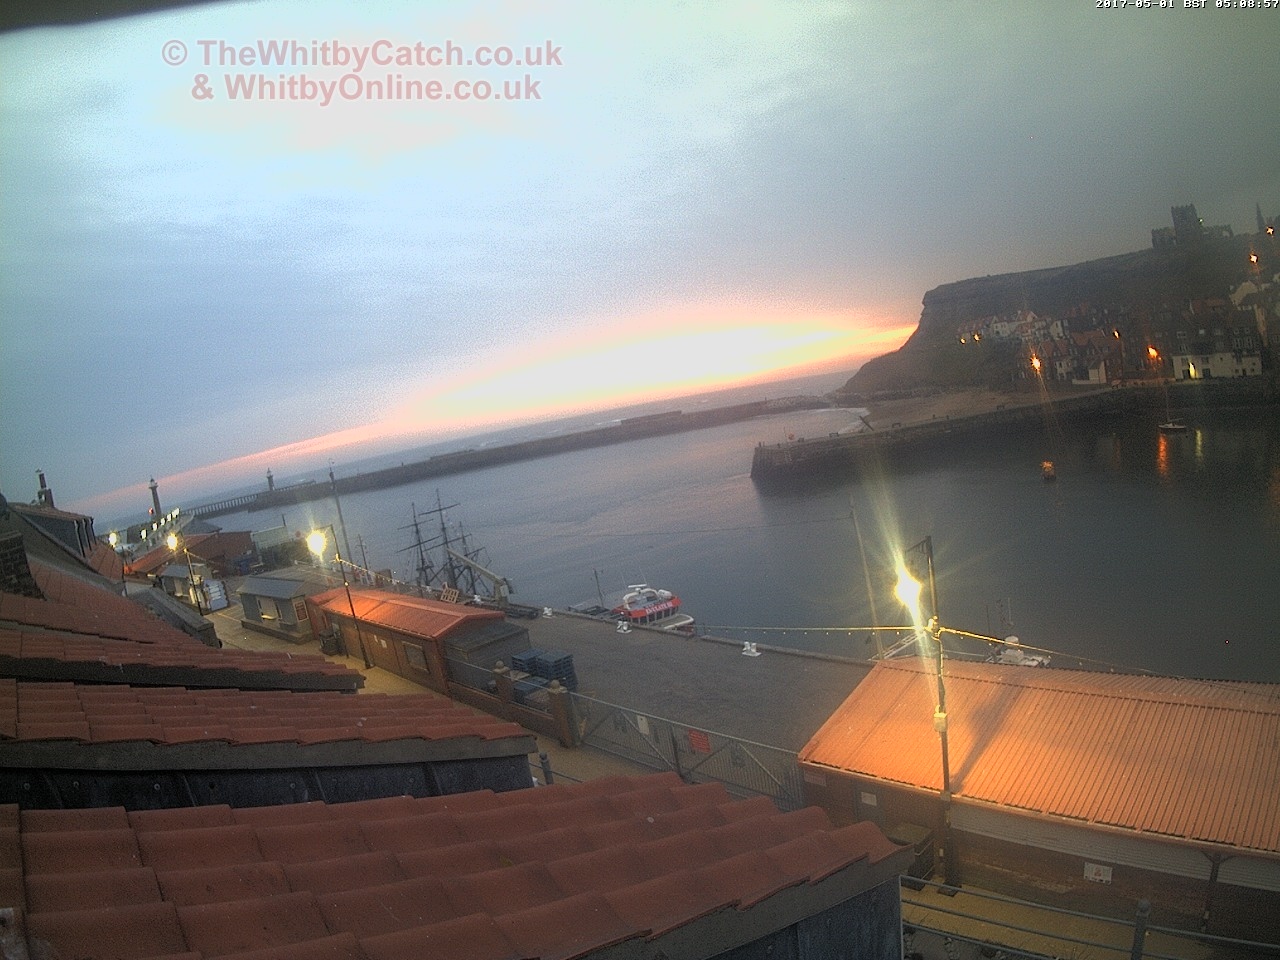 Whitby Mon 1st May 2017 05:09.